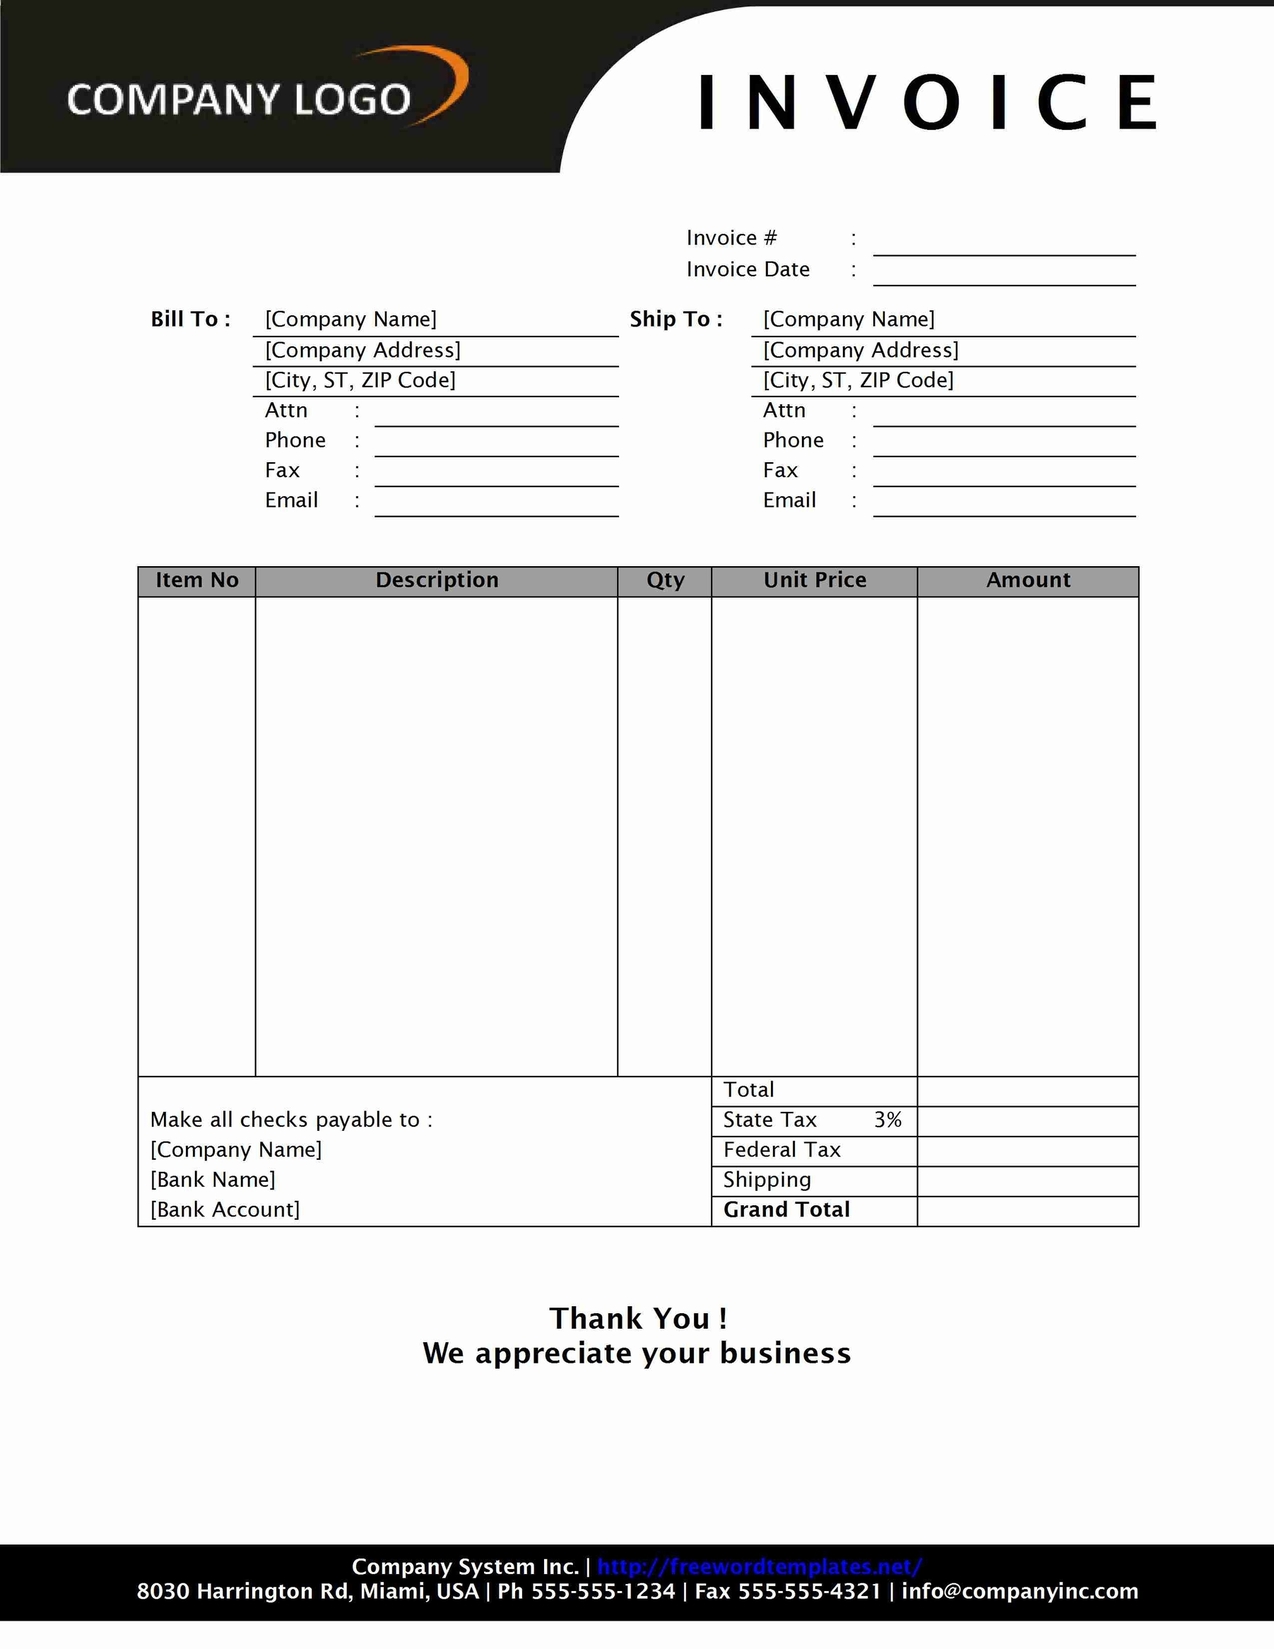 sales-invoice-print-format-with-fixed-table-length-print-formats